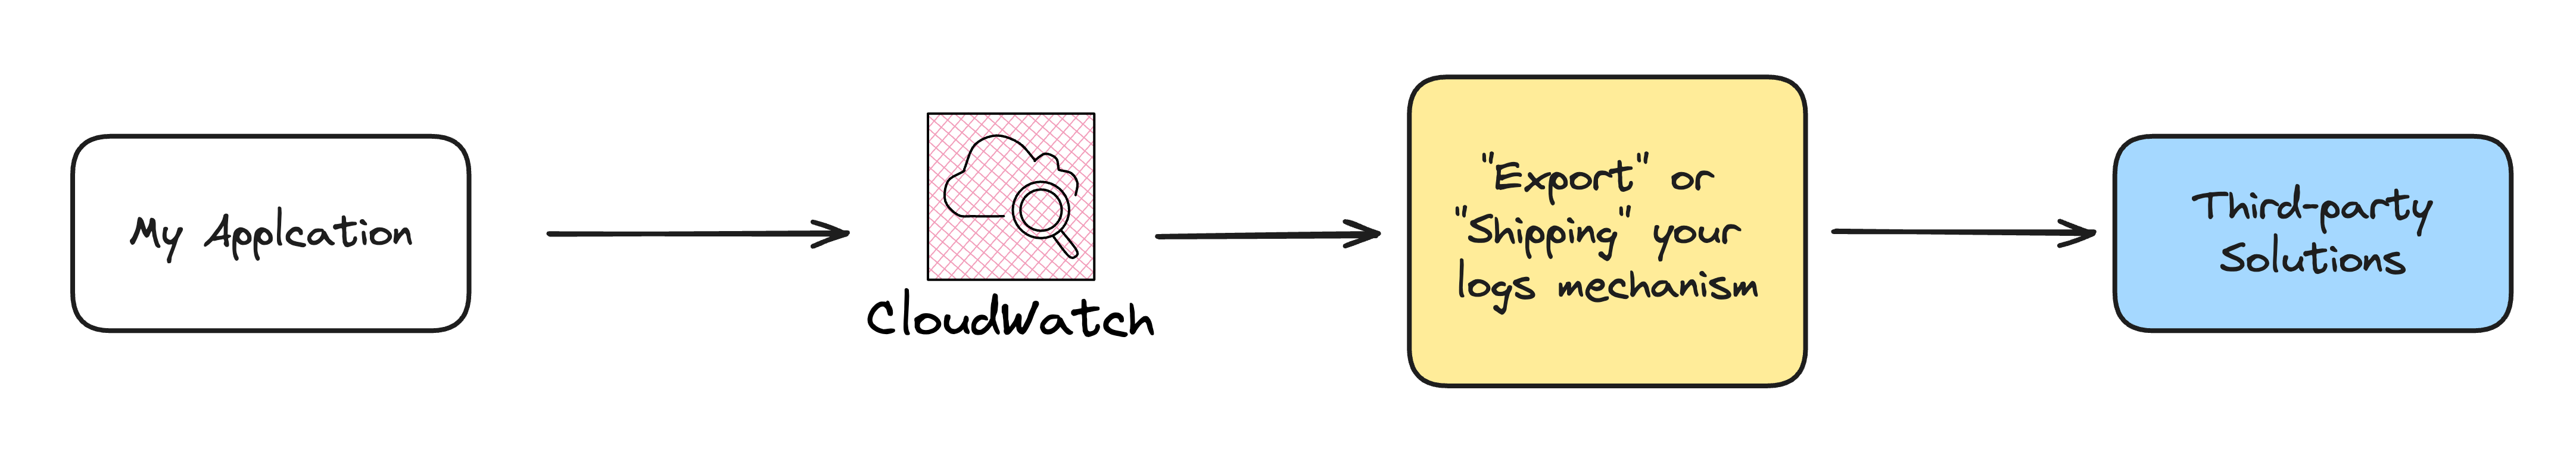 A diagram showing that third-party solutions enforce the concept of "exporting" your logs from CloudWatch to their platform.